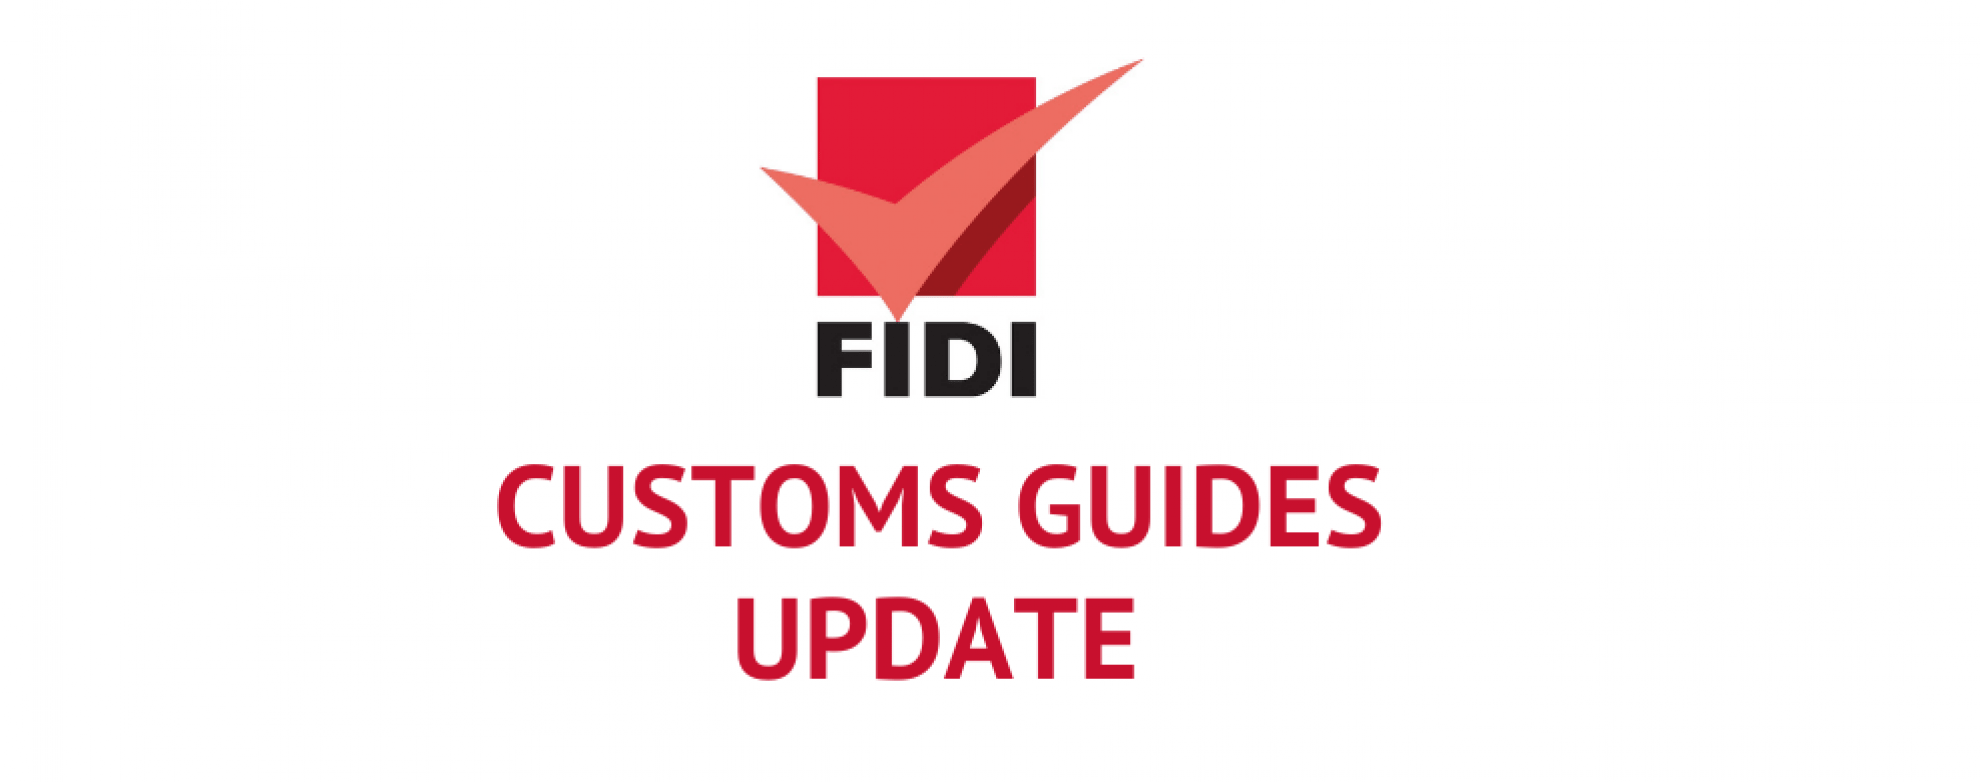 Austria's customs guides have been updated